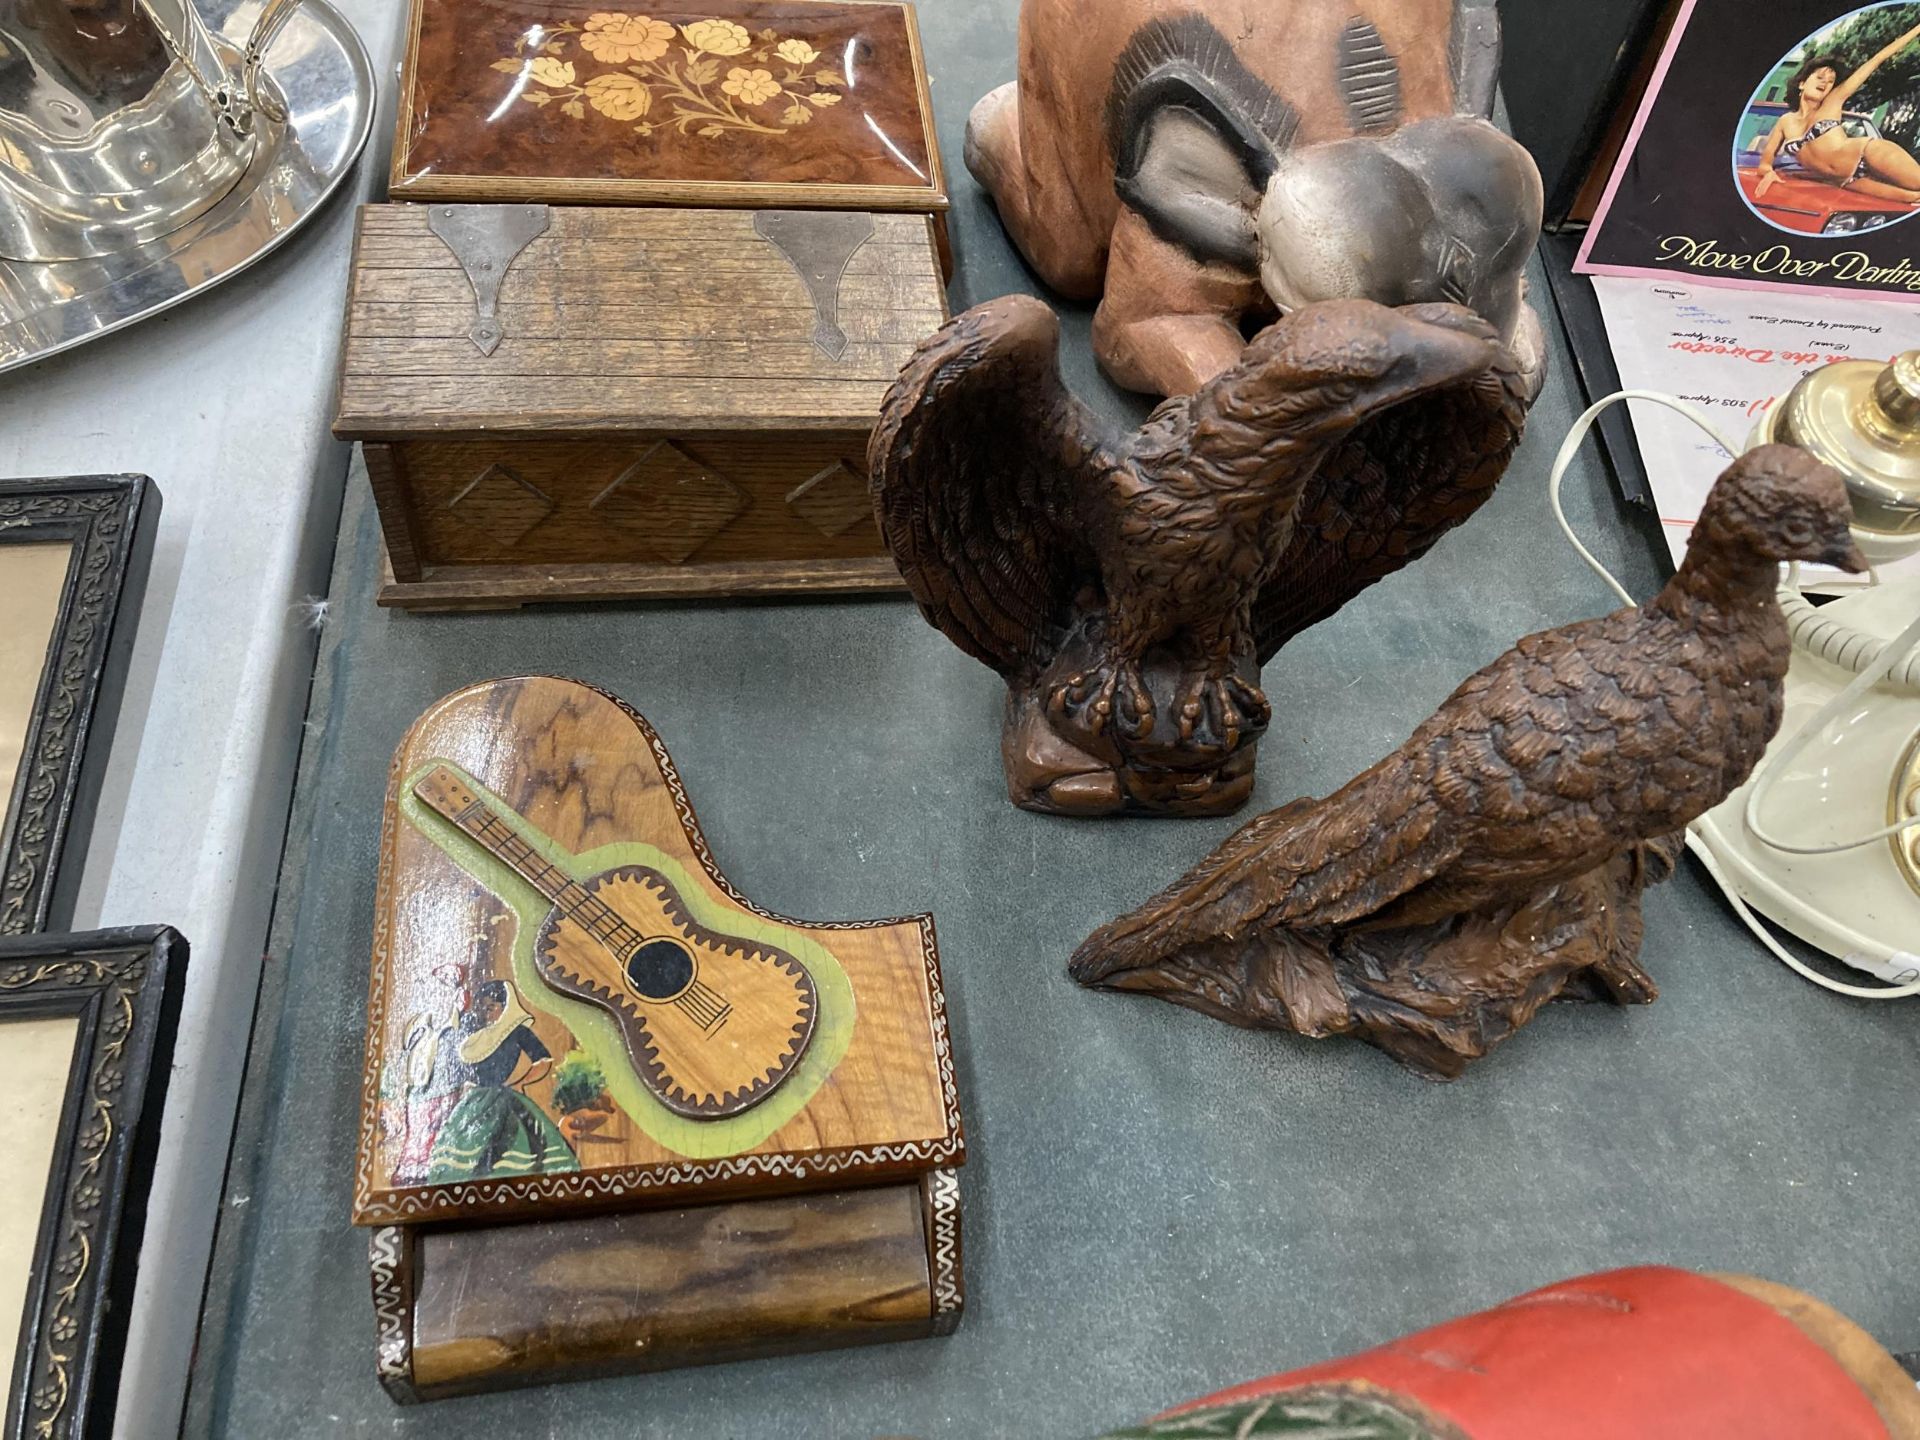 A COLLECTION OF WOODEN WARES,ROCKING PIG FIGURE, INLAID BOX, EAGLE FIGURE - Image 3 of 4